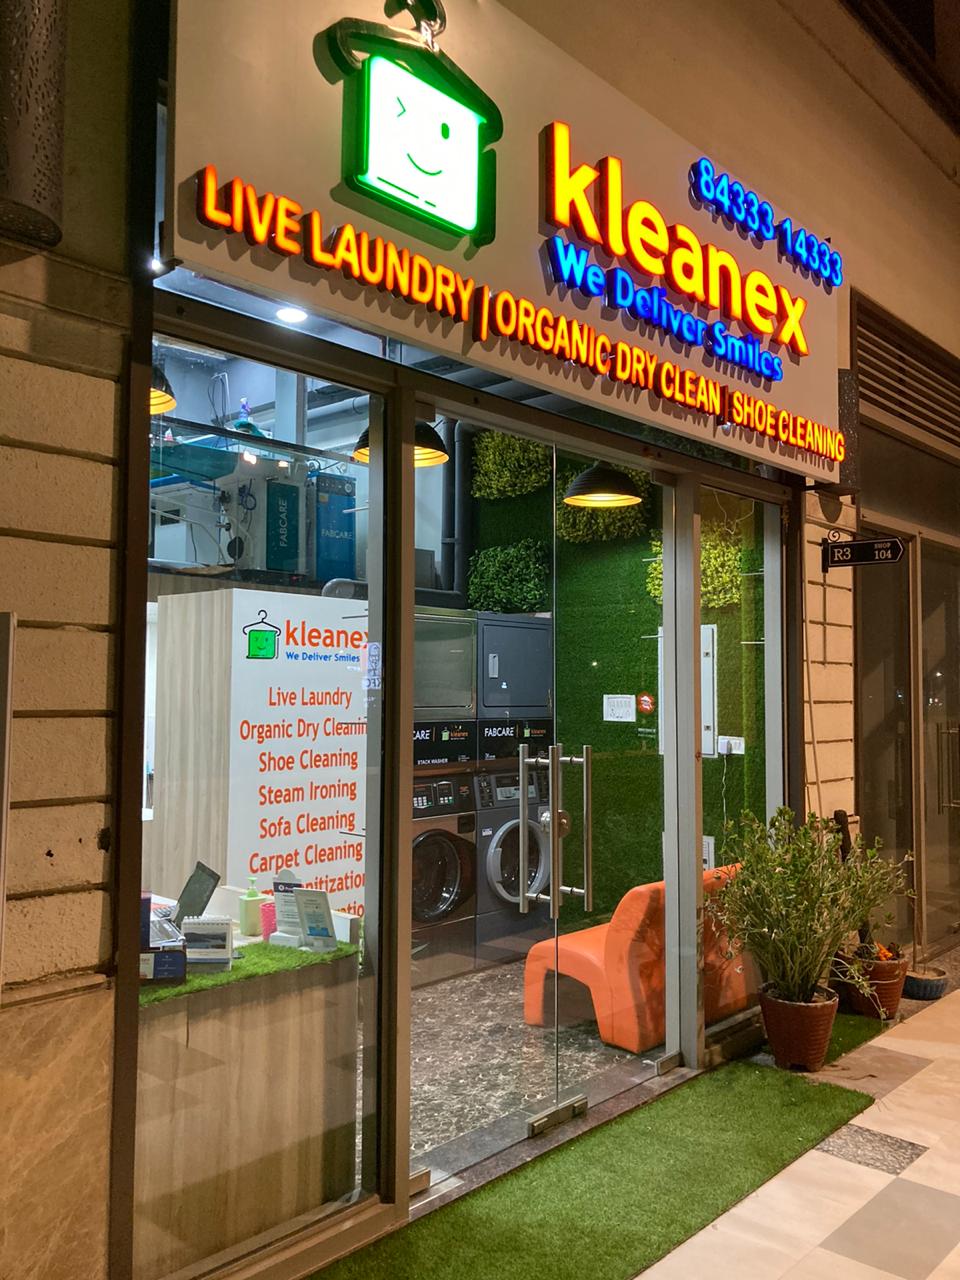 Best Dry Cleaning Service in Sector 67 Gurgaon | Sofa & Carpet Dry Cleaning Sector 67 Gurgaon | Dry Cleaners in Sector 67 Gurgaon | Kleanex Laundry & Dry Cleaning